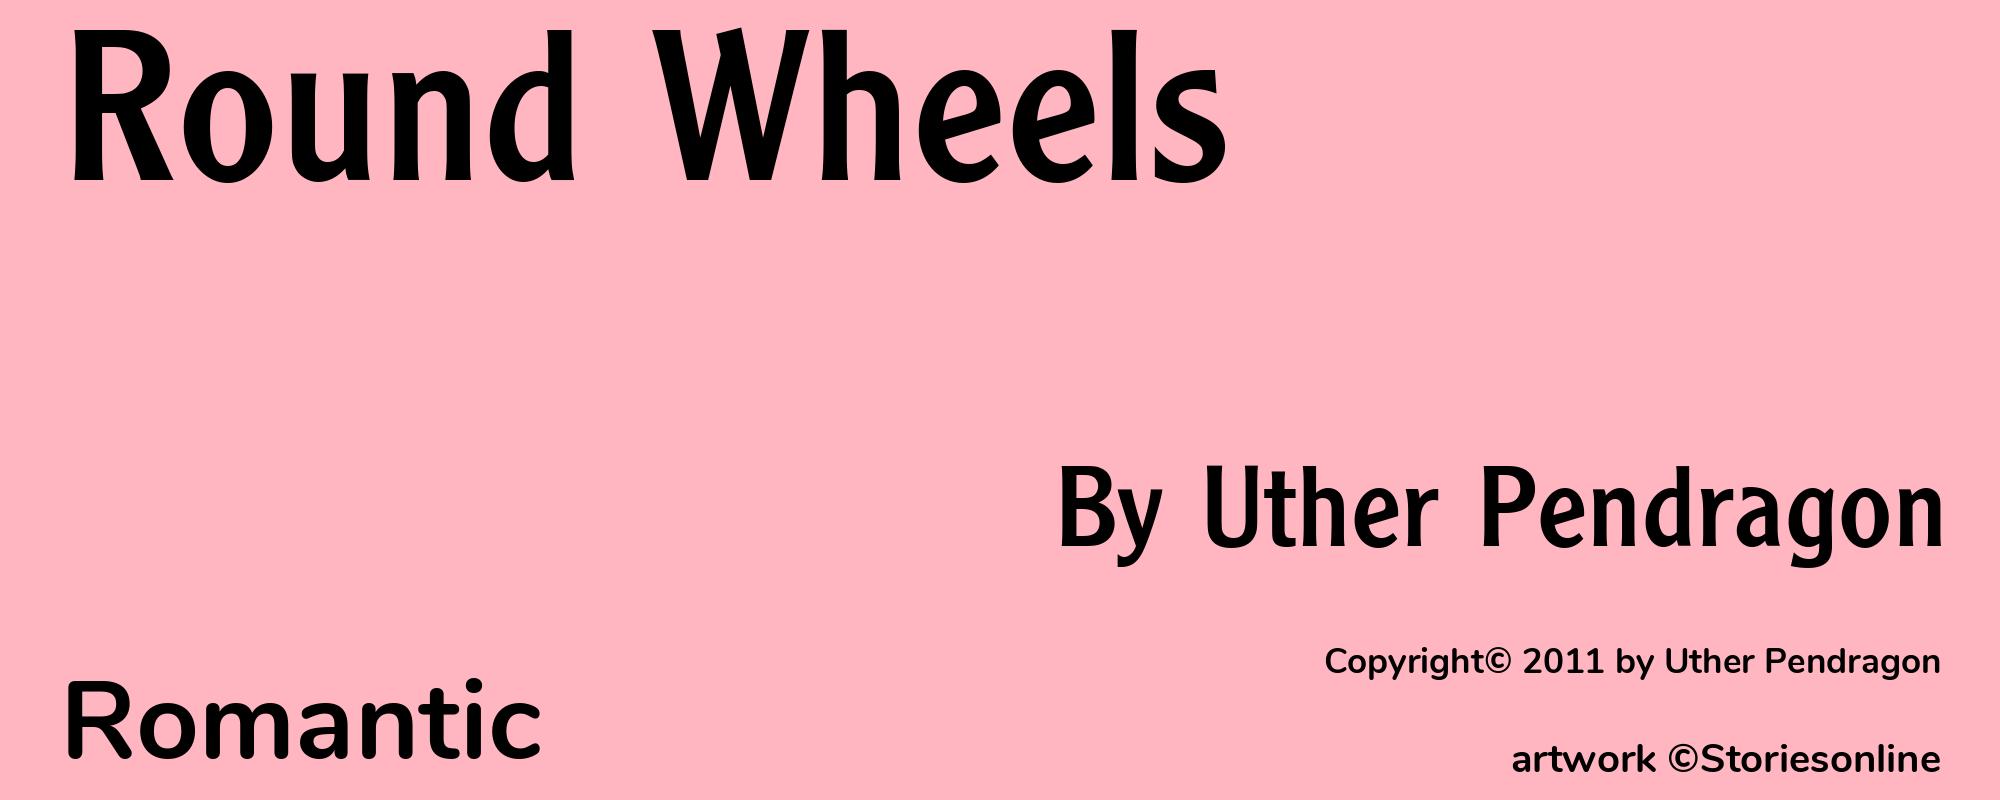 Round Wheels - Cover